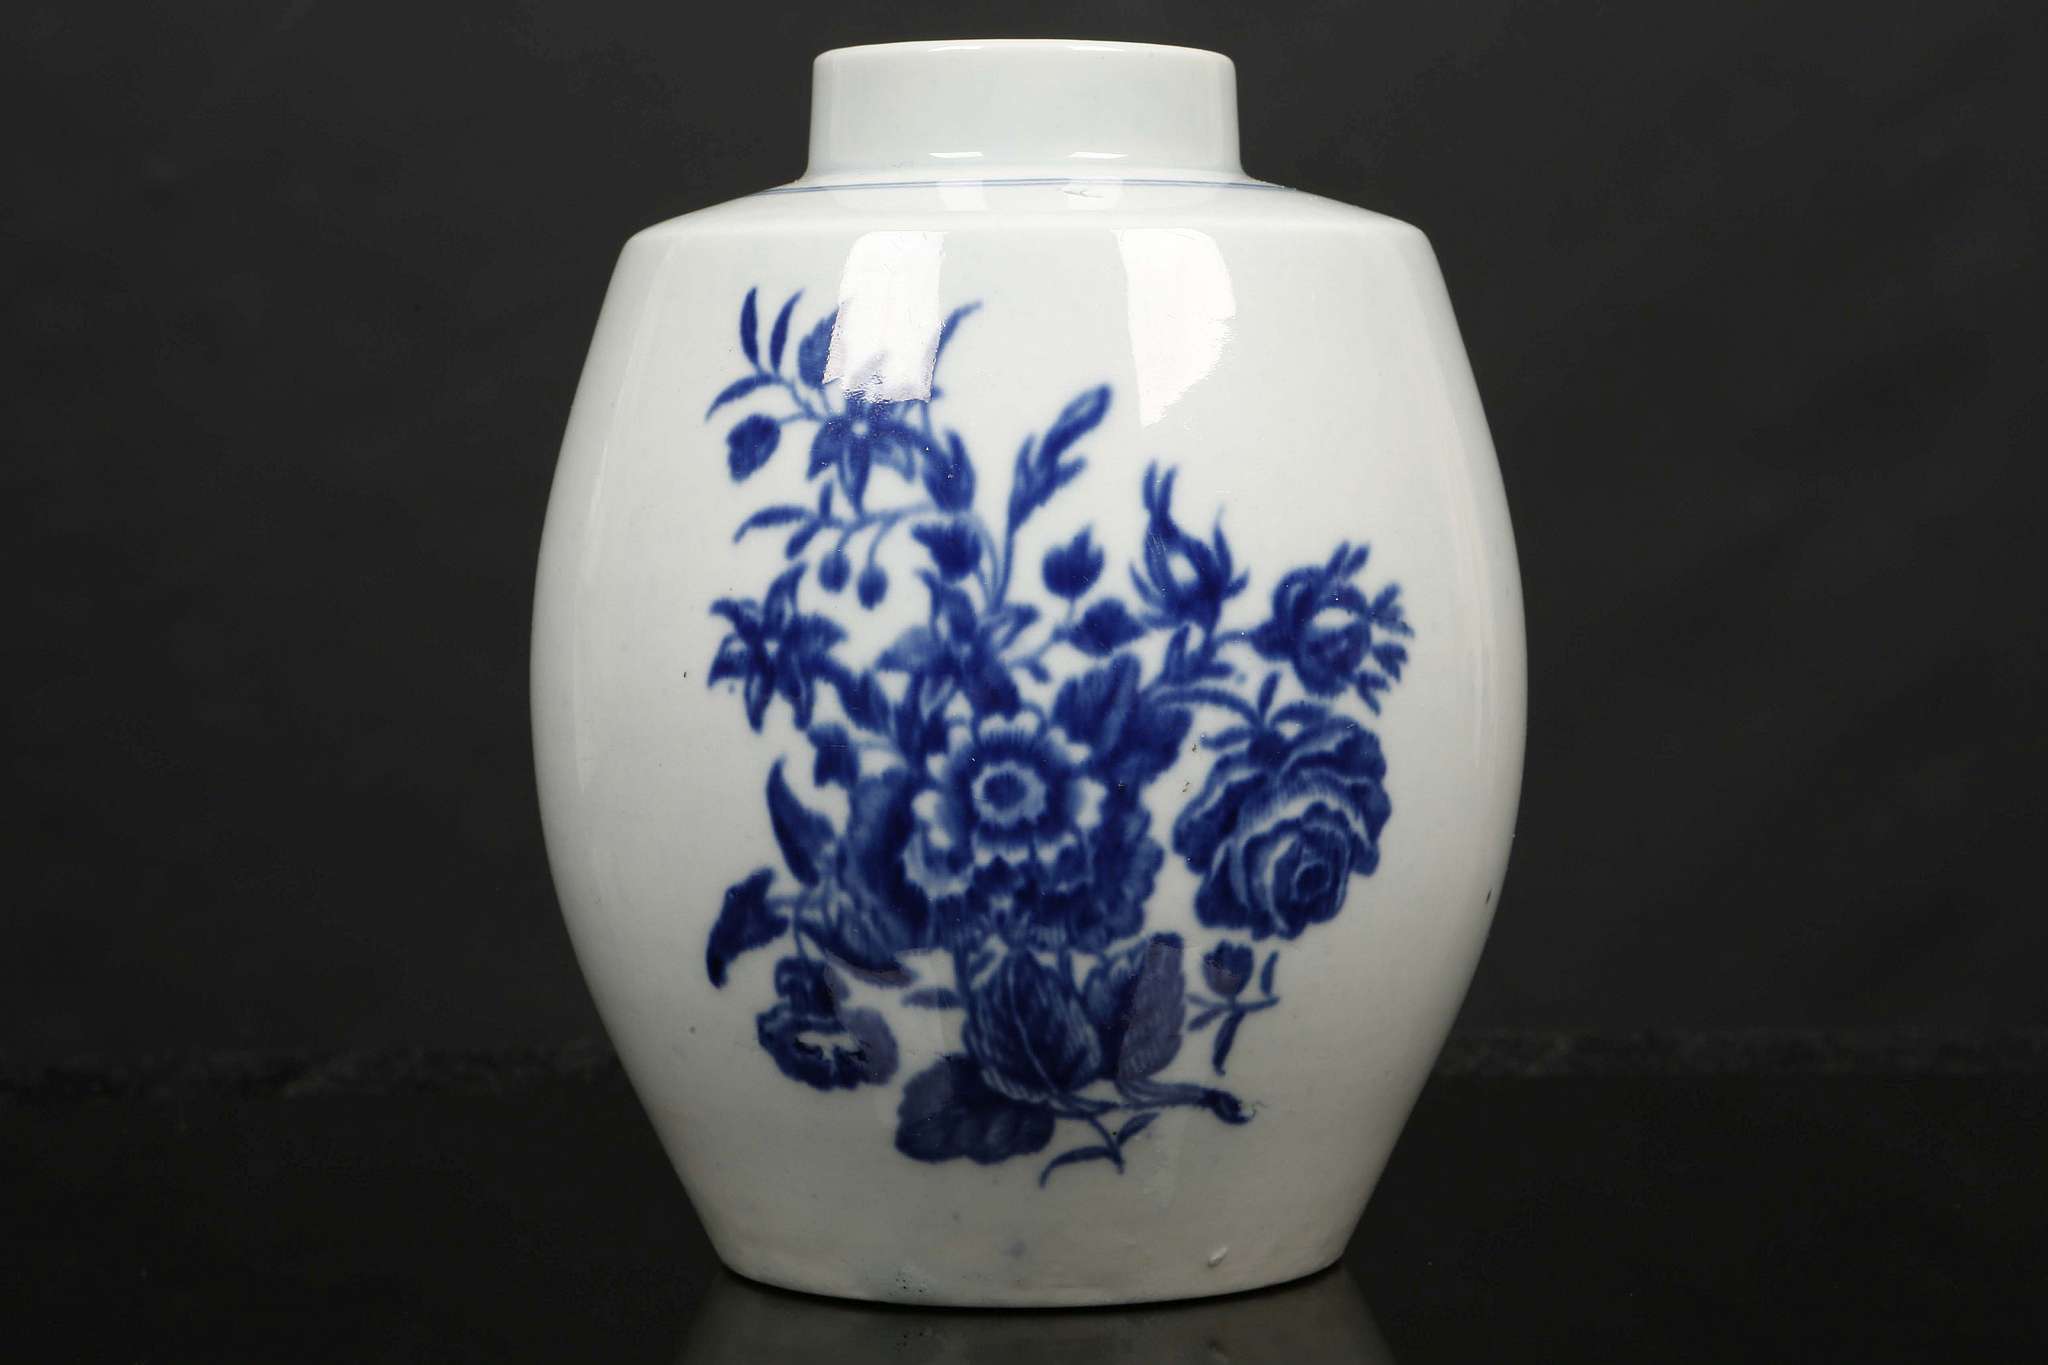 A WORCESTER TEA CANISTER, circa 1770, of barrel form, printed in blue with the 'Three Flowers'